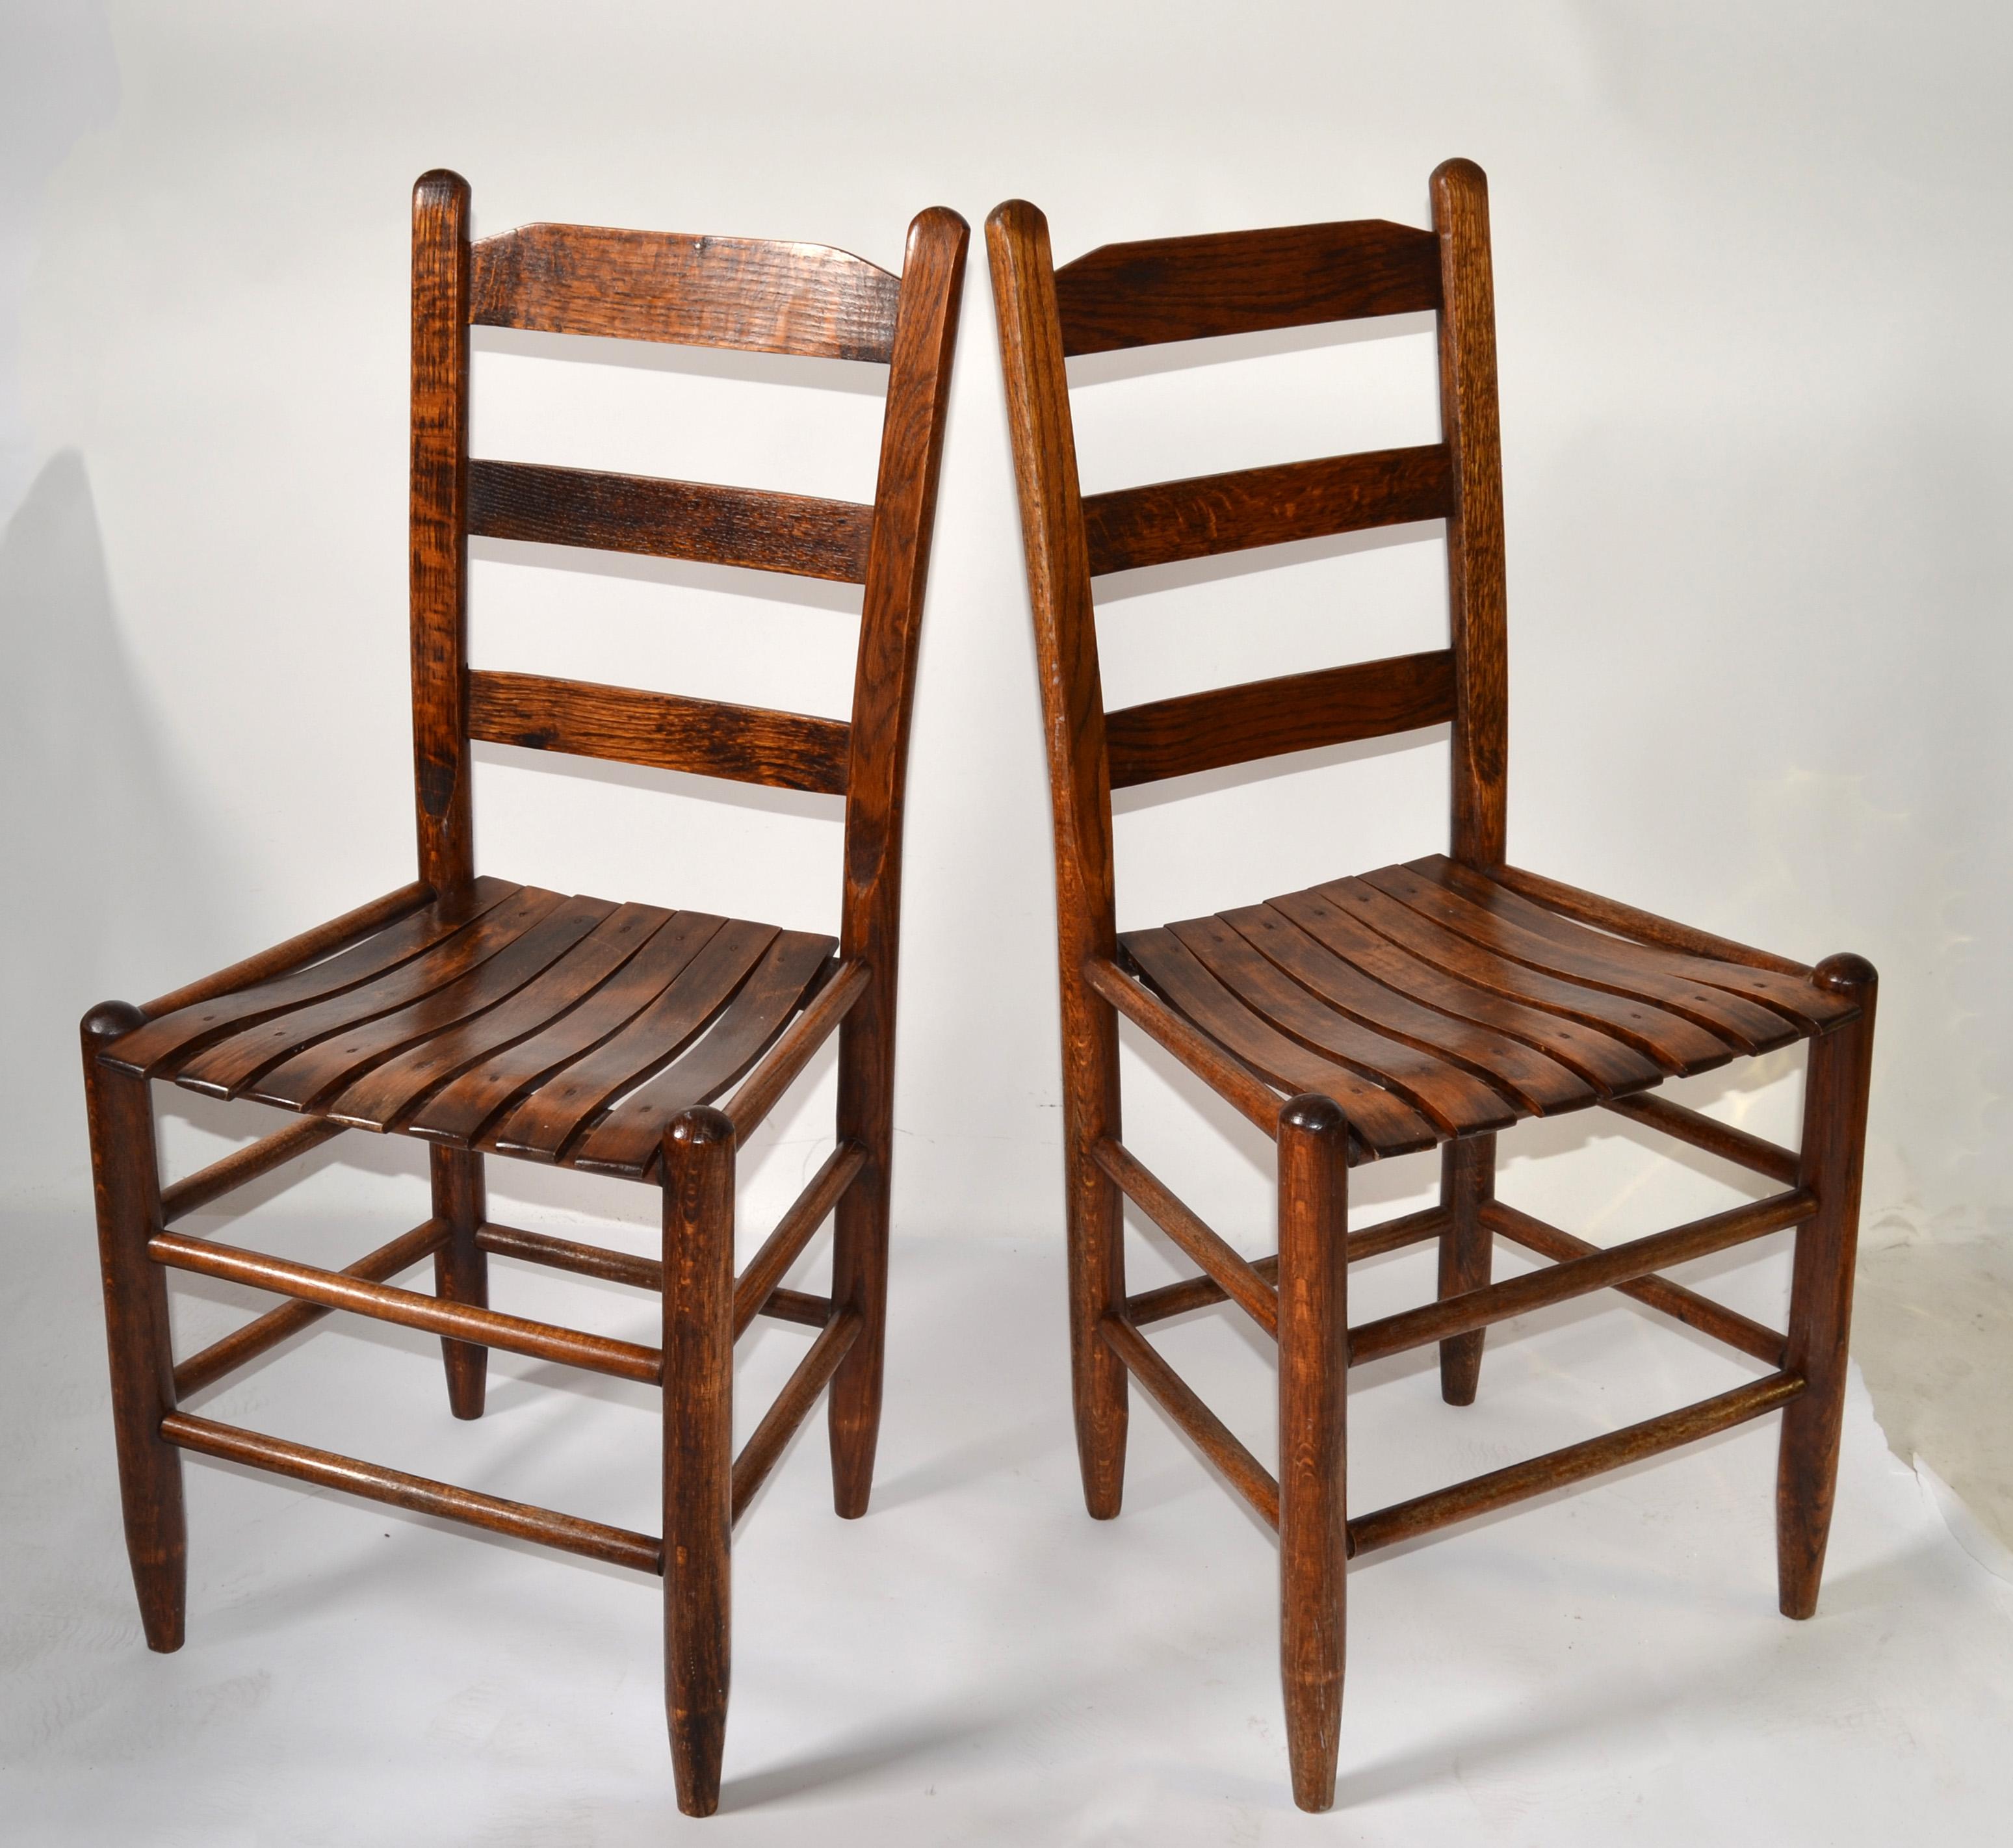 Pair of Rustic handmade Oak Side, Bistro or Dining Chairs in the Style of Charlotte Perriand and from the Mid-20th Century Modern Period.   
Solid Oak Wood features a tall Ladder Back Rest and a wood panel seat.
In good vintage condition with some